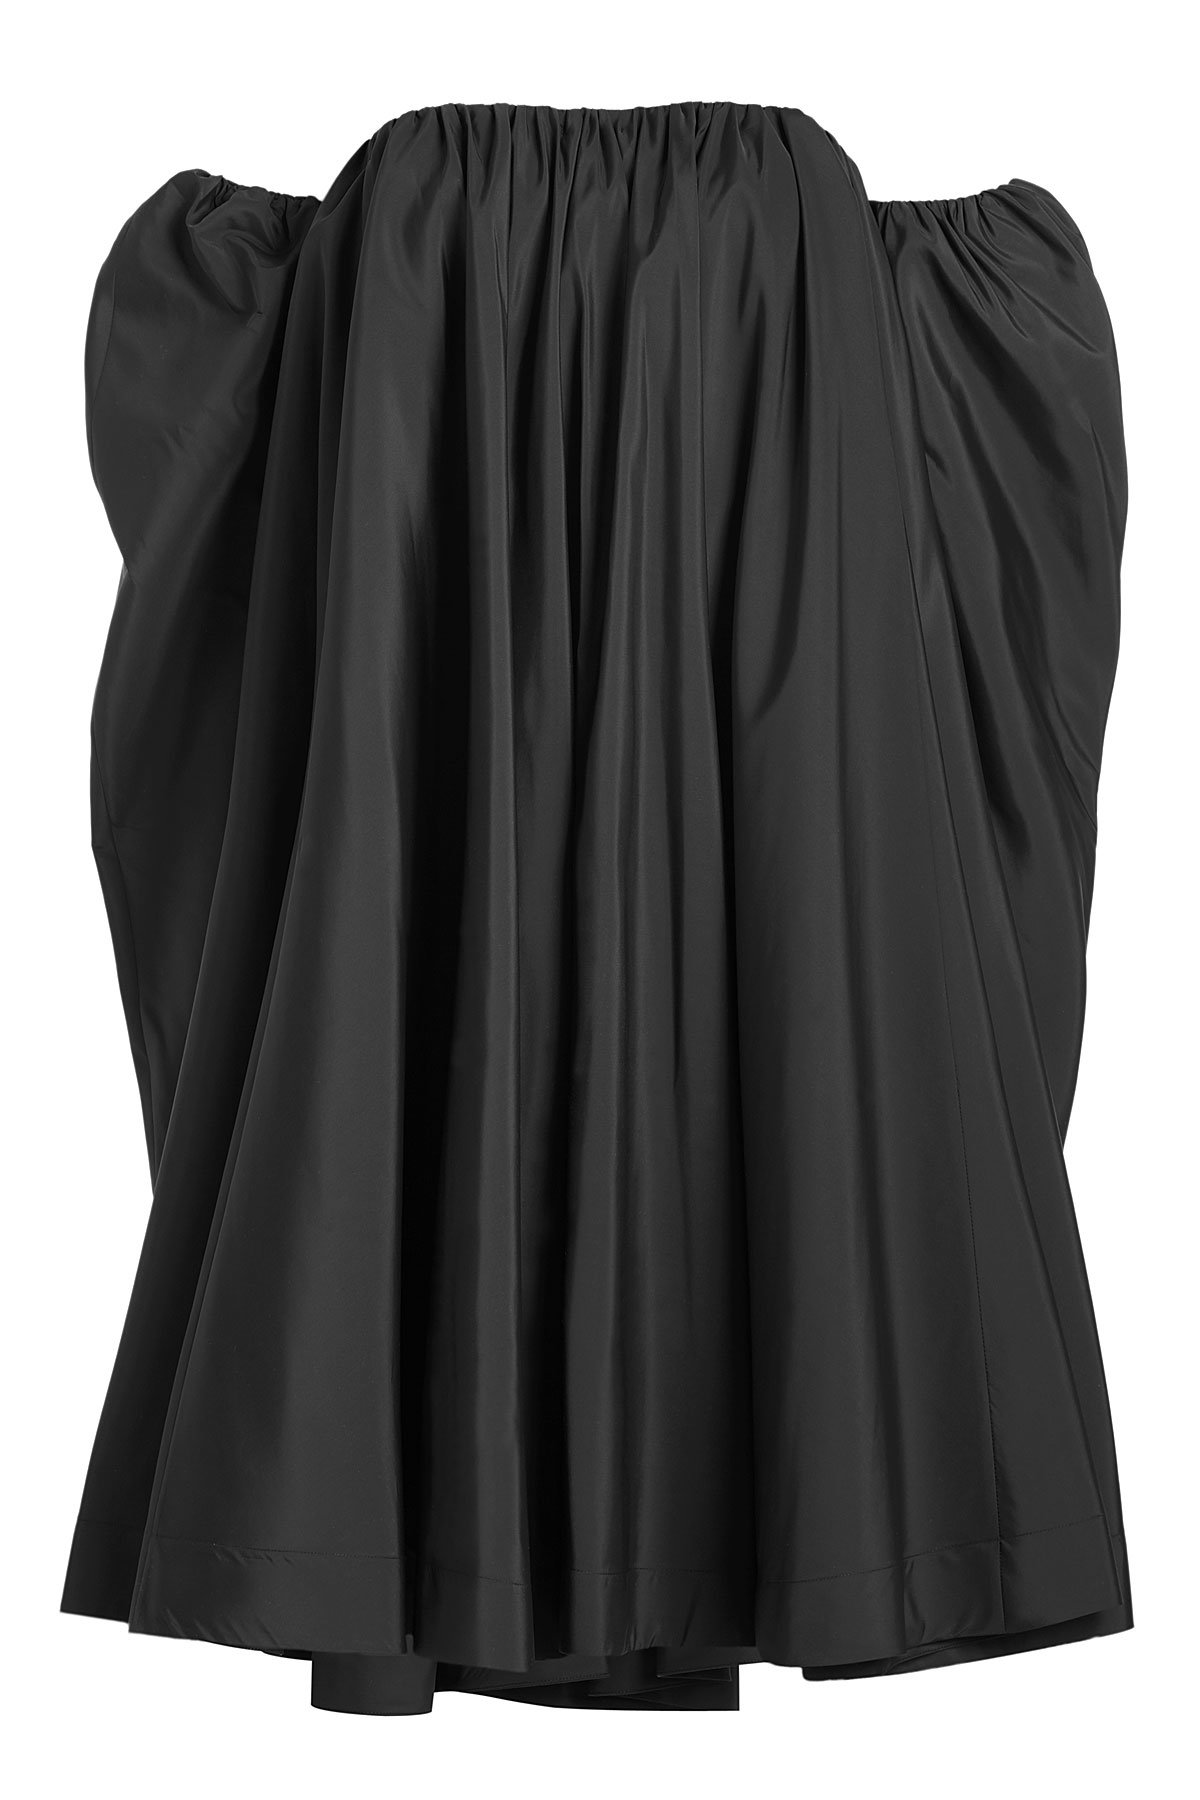 CALVIN KLEIN 205W39NYC - Off The Shoulder Dress with Silk